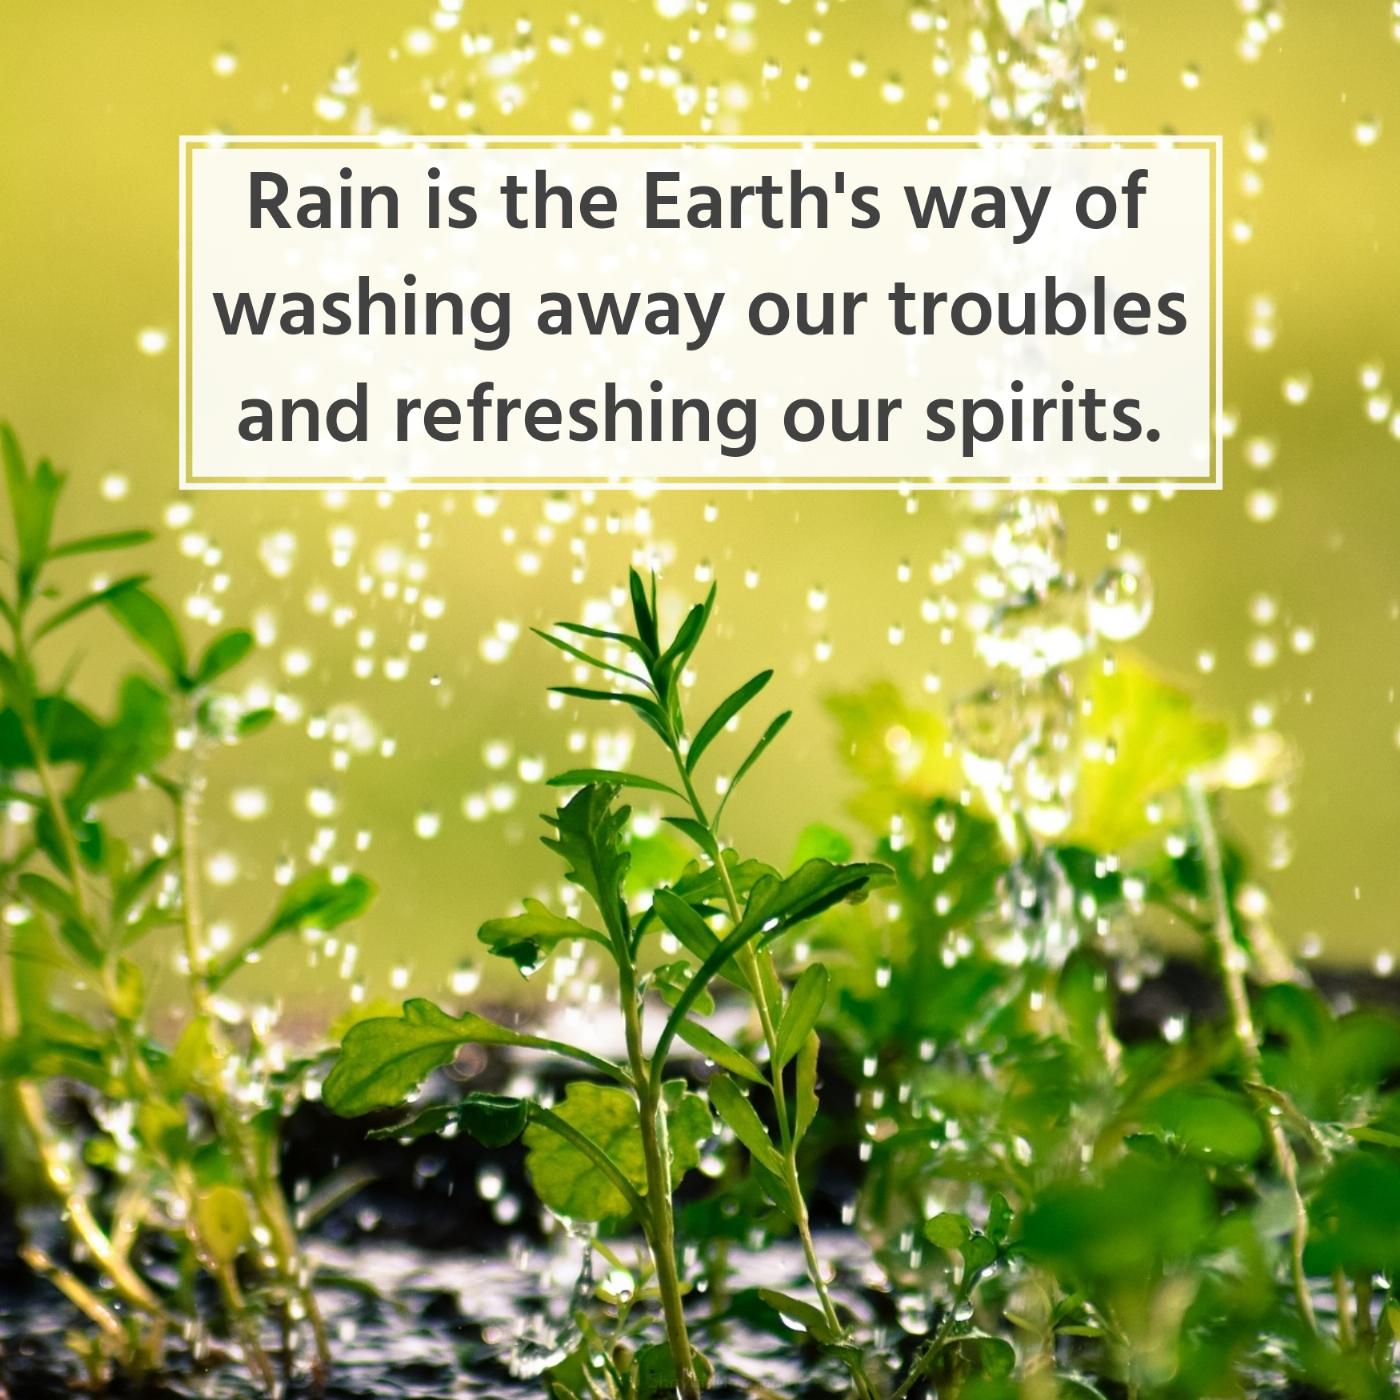 Rain is the Earth's way of washing away our troubles